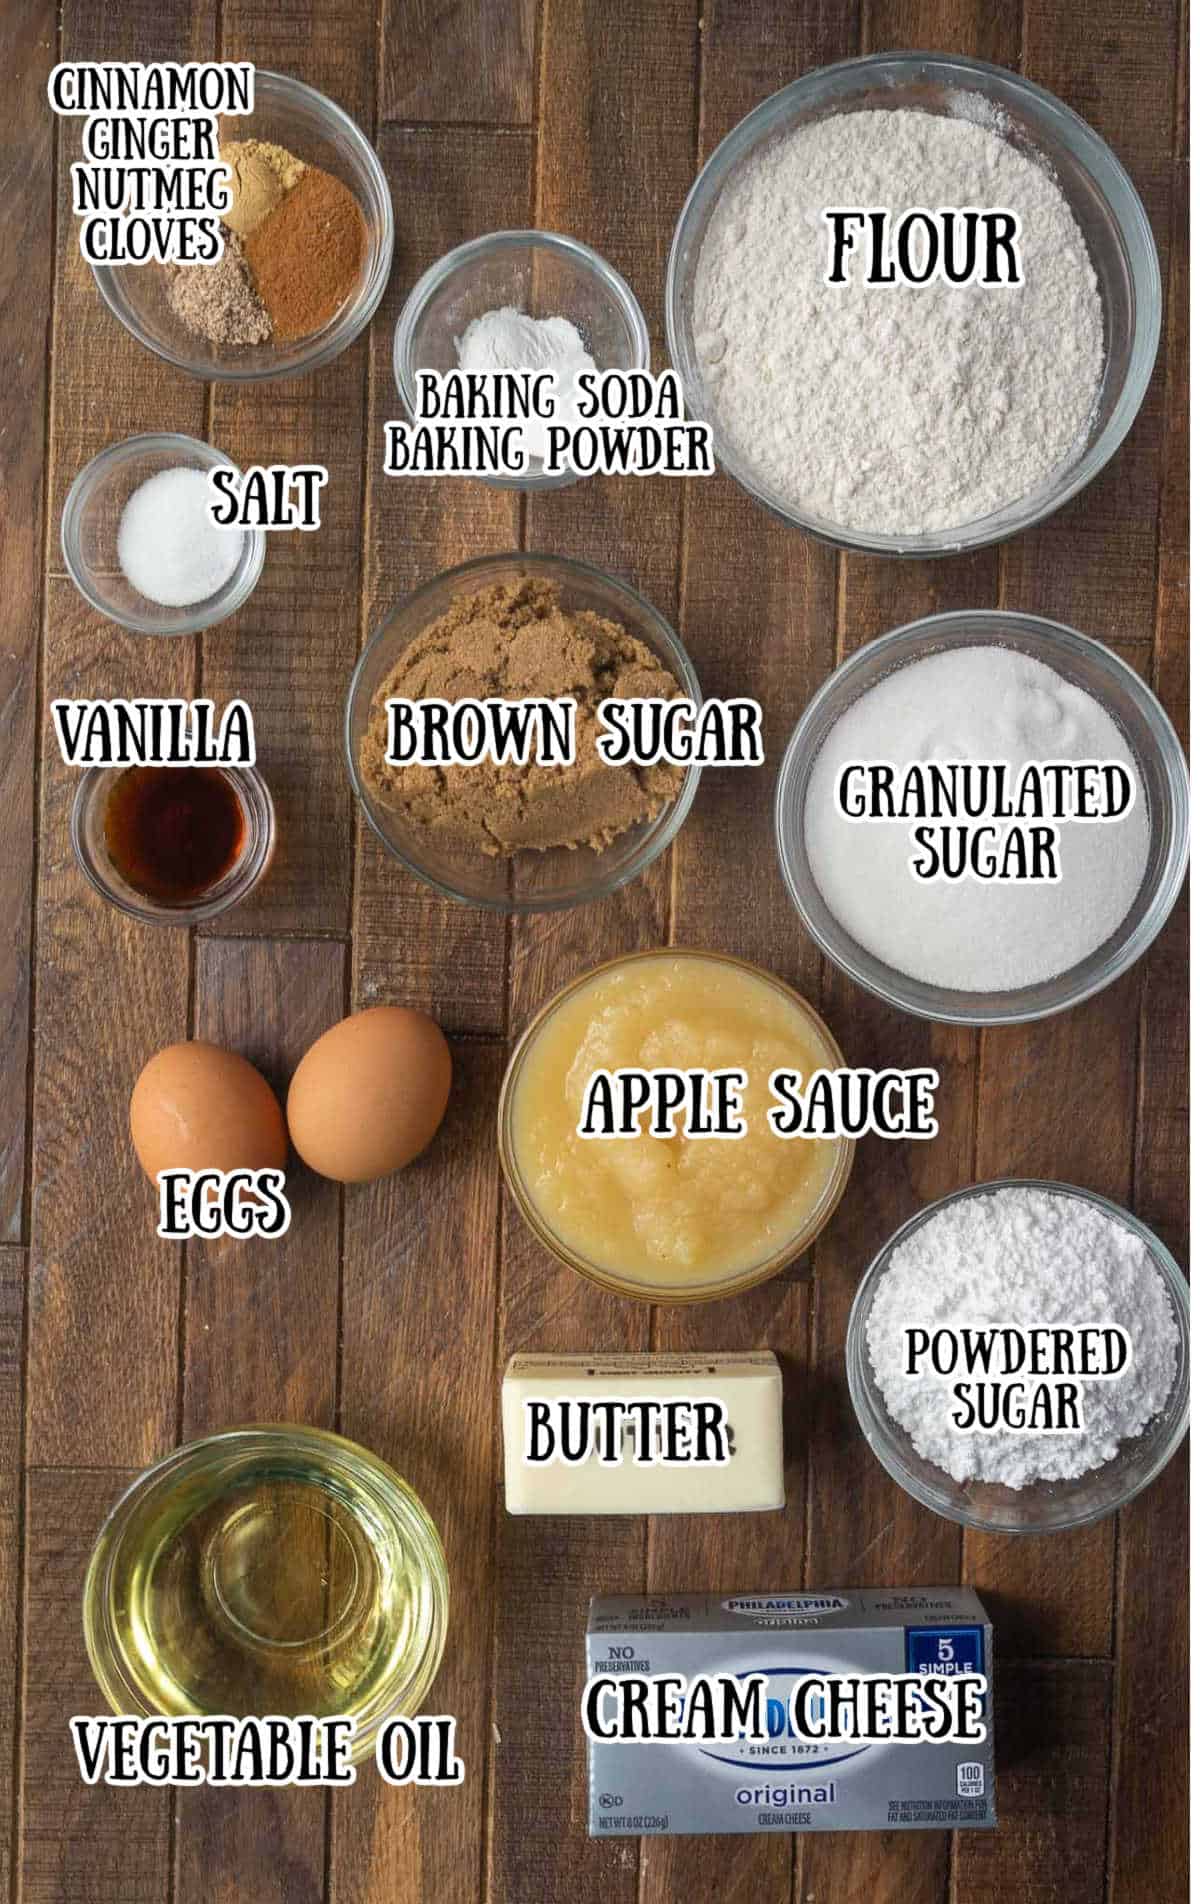 All the ingredients needed for this cake.